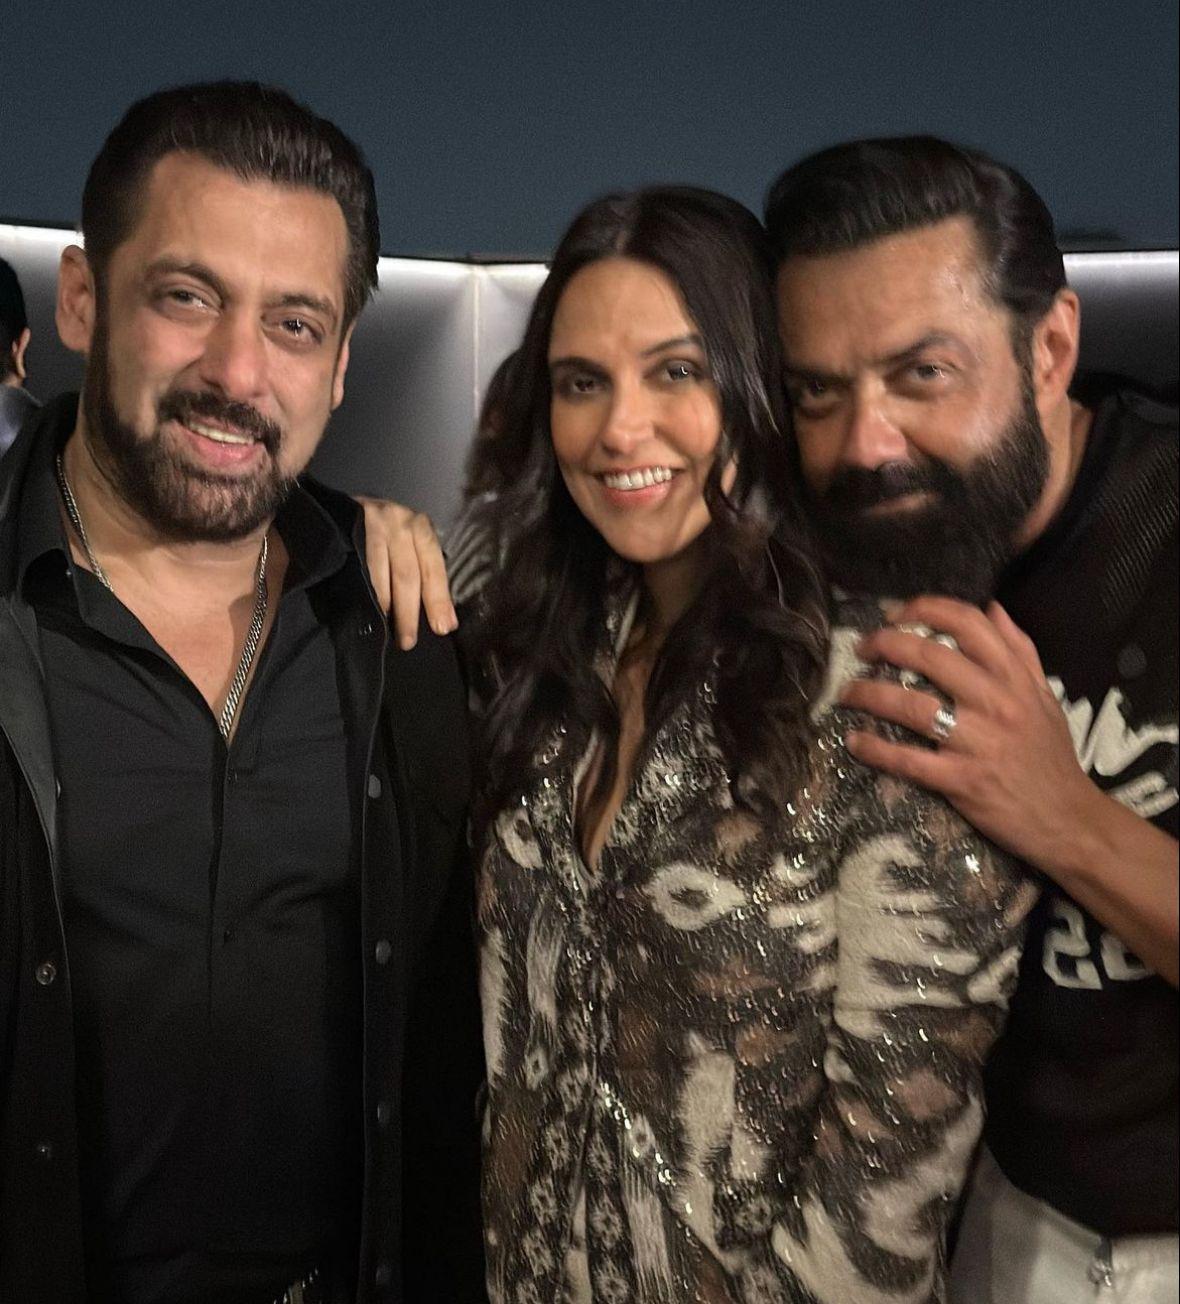 In this picture see Salman Khan flashing his smile while striking a pose with Neha Dhupia and Bobby Deol